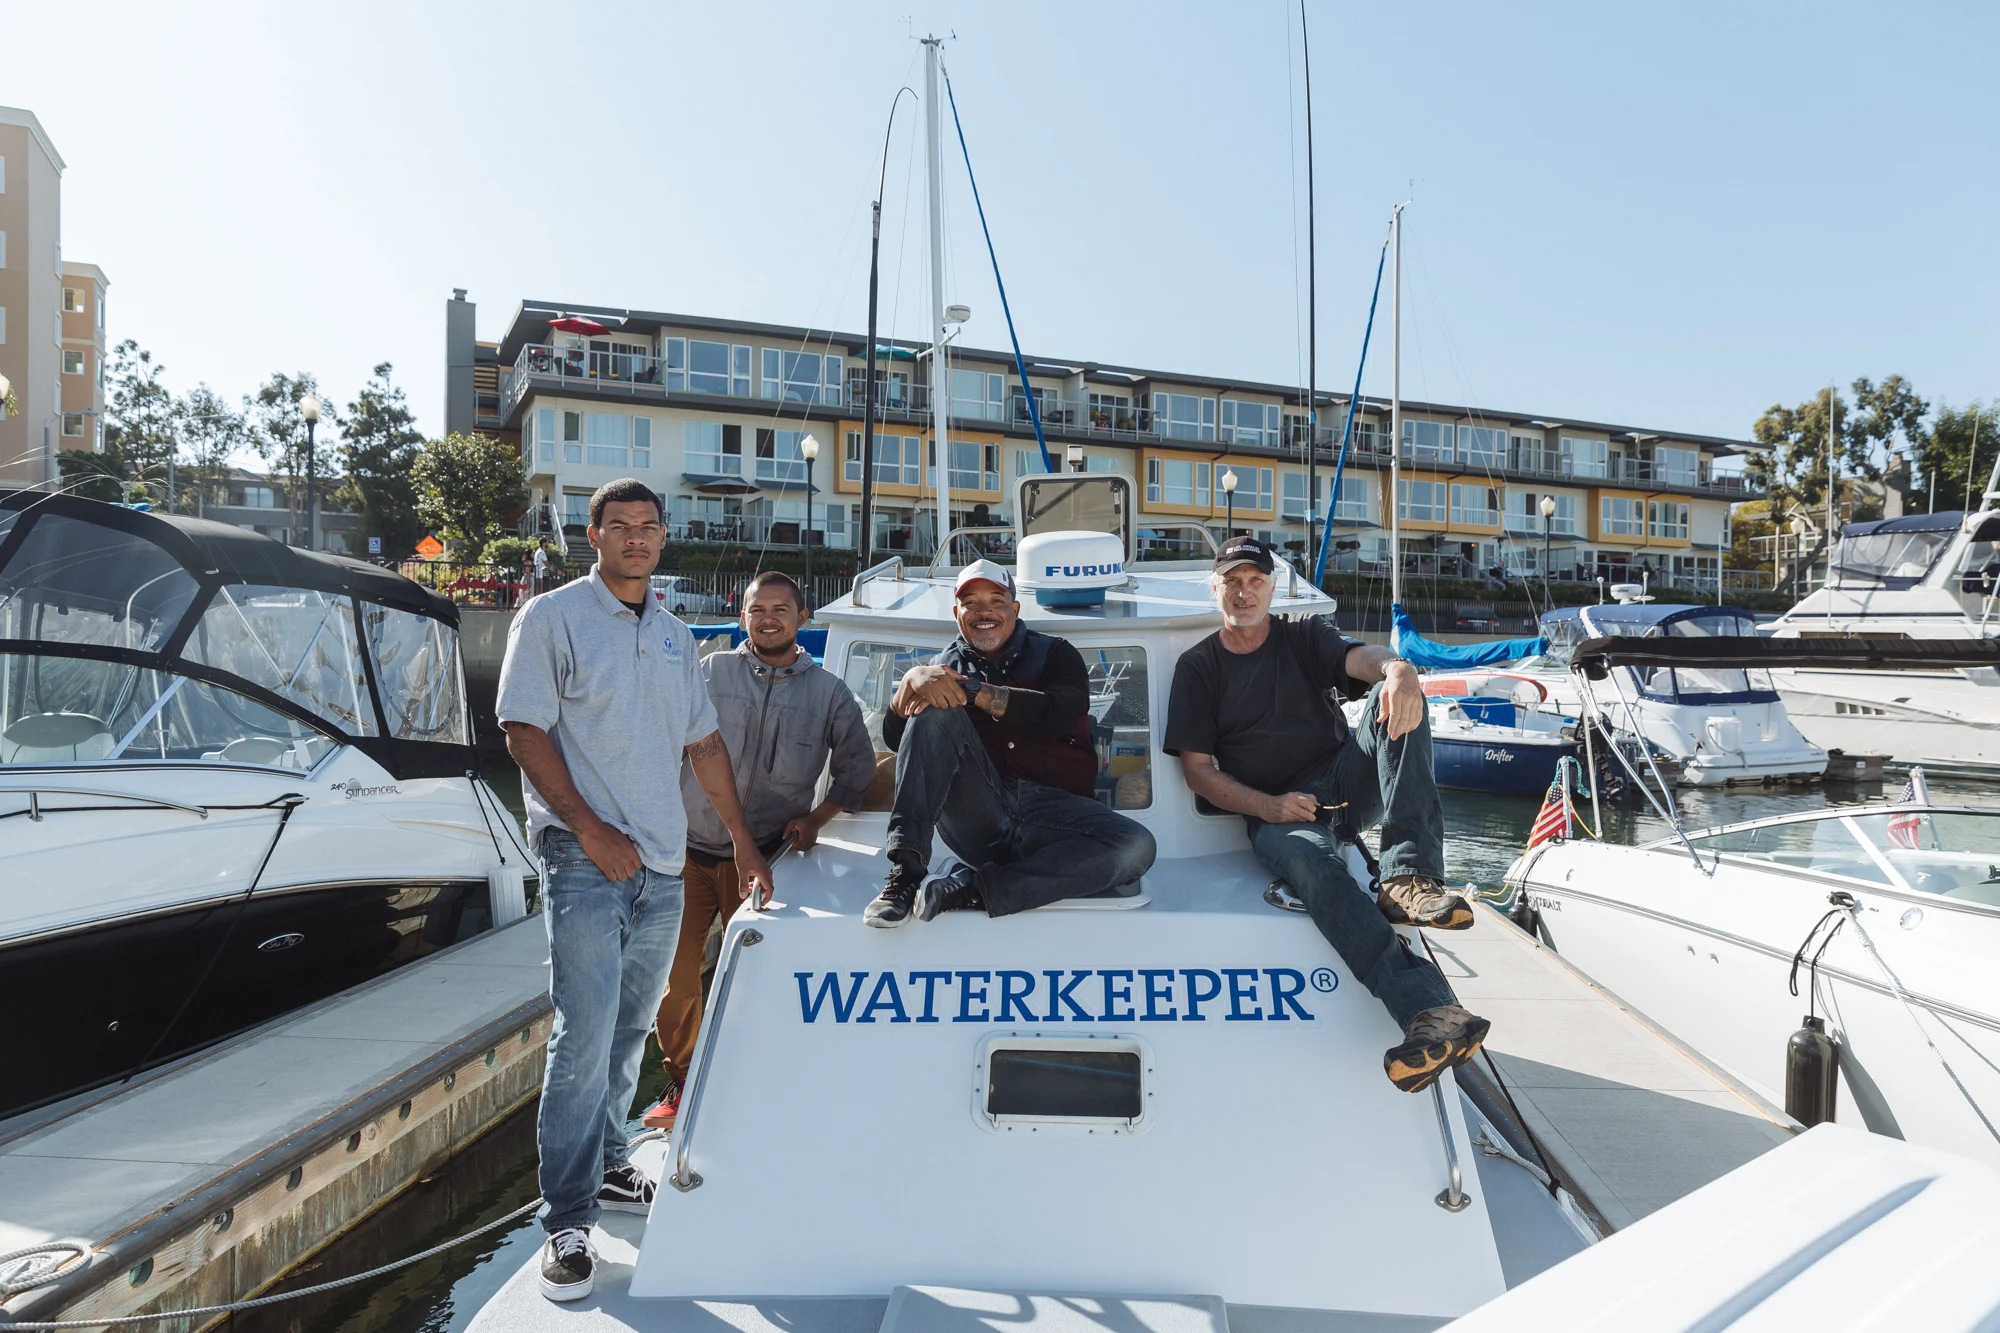 Four men of light neutral skin tone on a boat that says waterkeeper